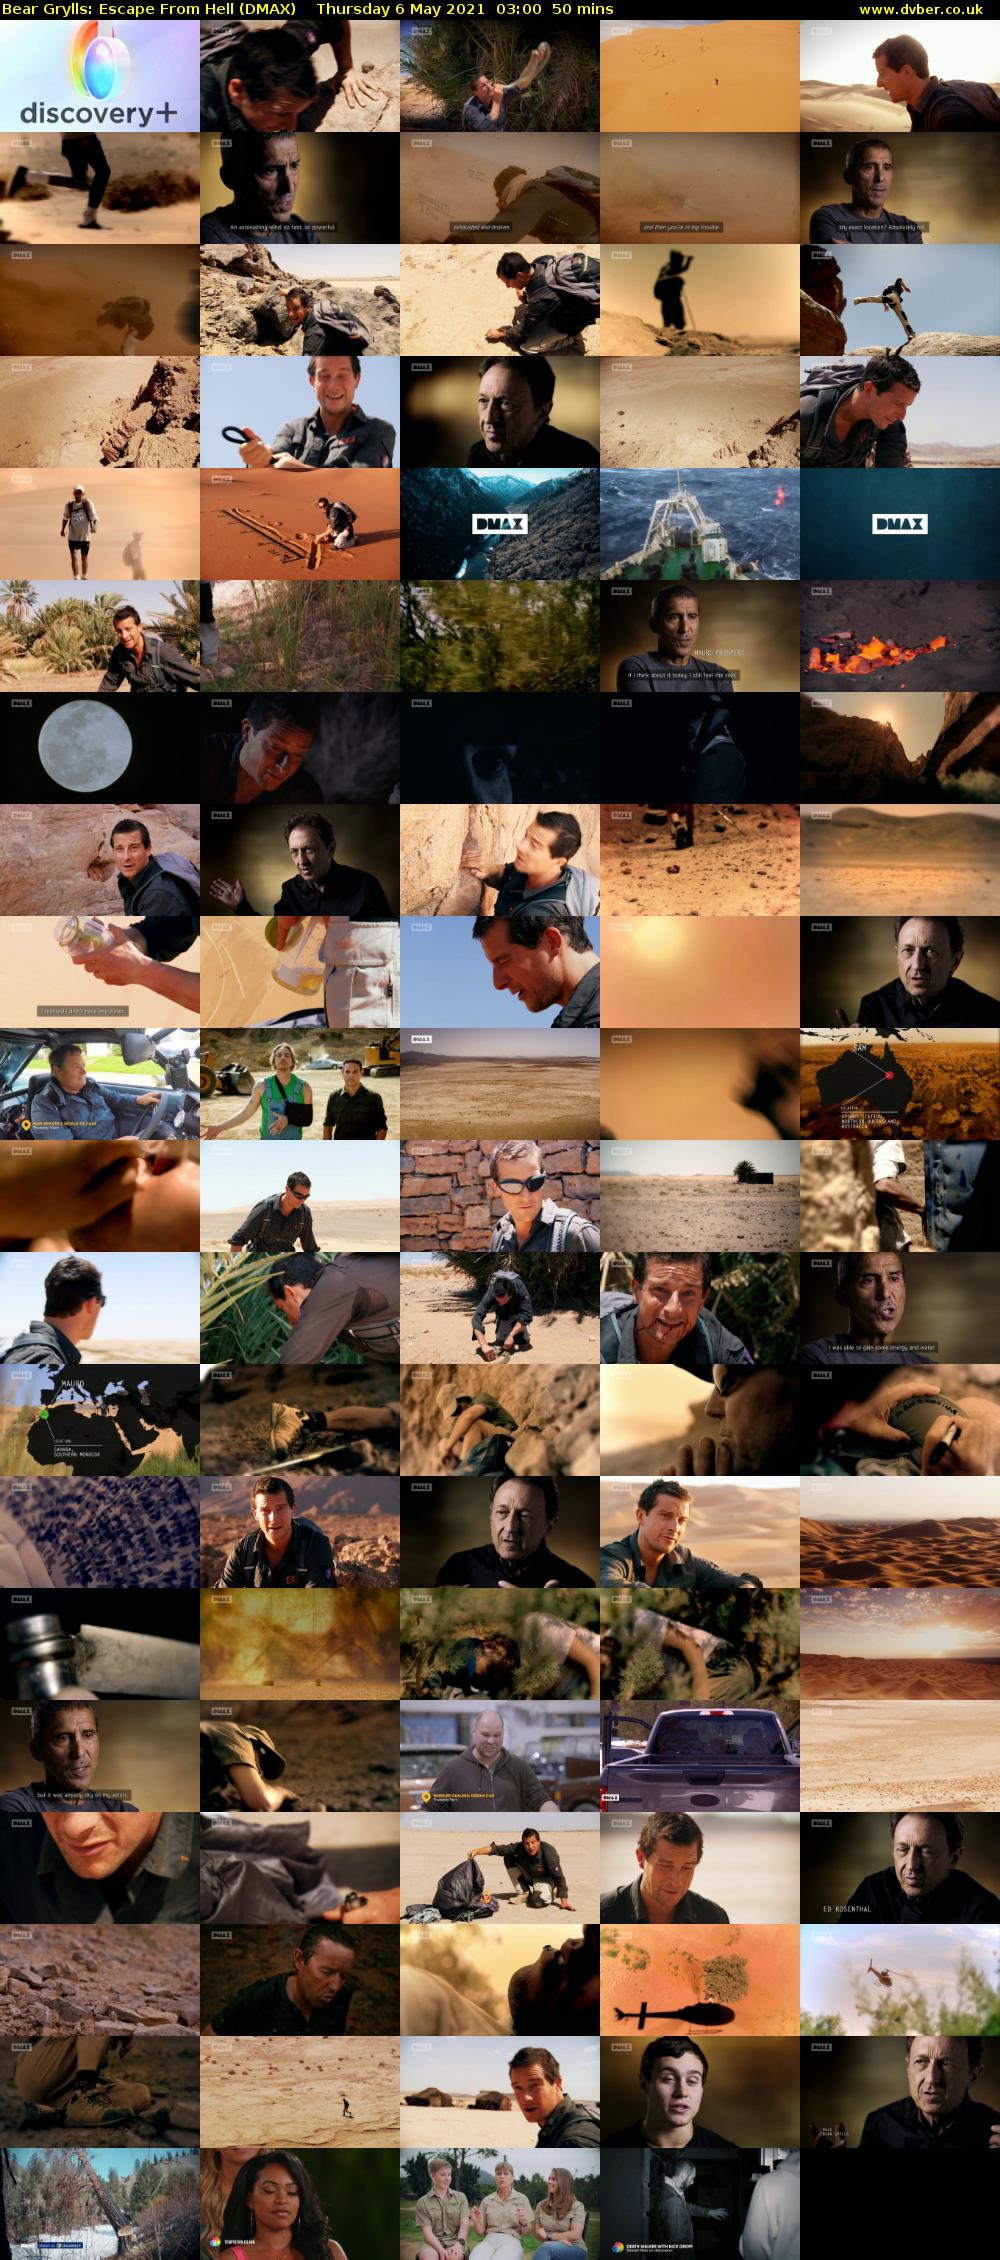 Bear Grylls: Escape From Hell (DMAX) Thursday 6 May 2021 03:00 - 03:50